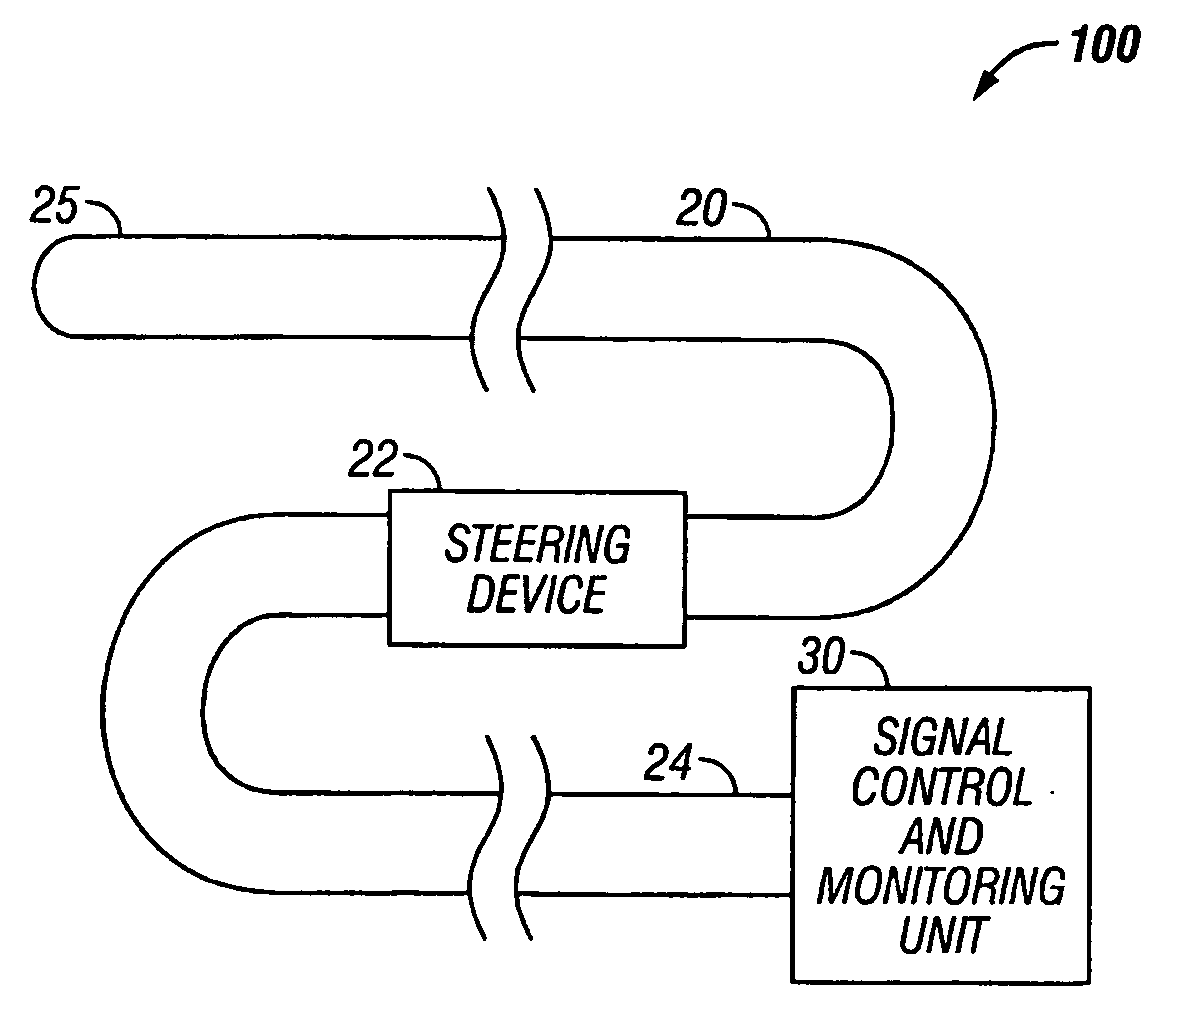 Tissue ablation apparatus and method using ultrasonic imaging